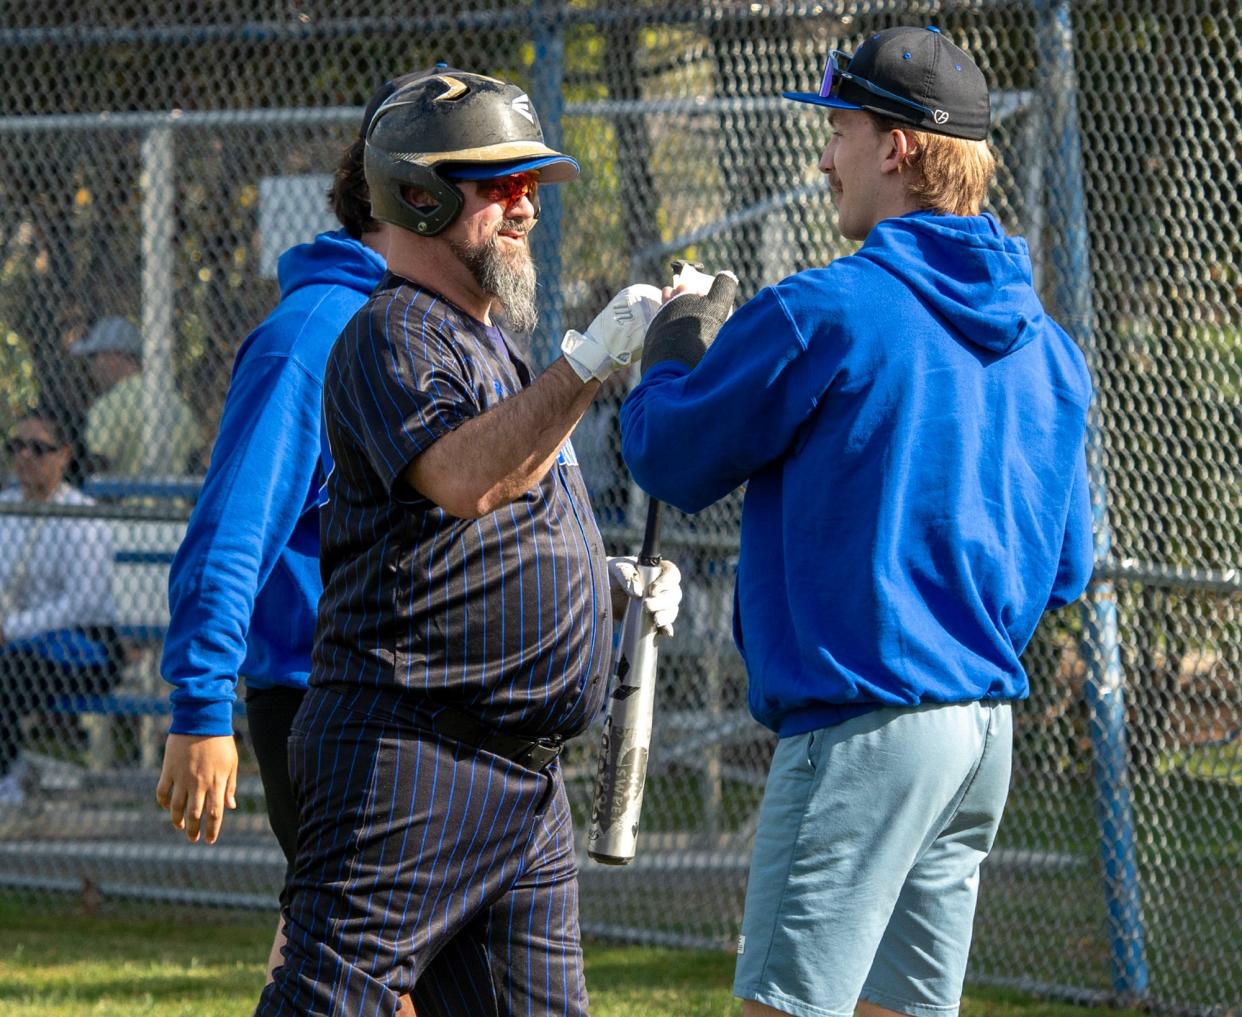 Quinsigamond's Paul Landry gets fist bumps after batting in the third inning.